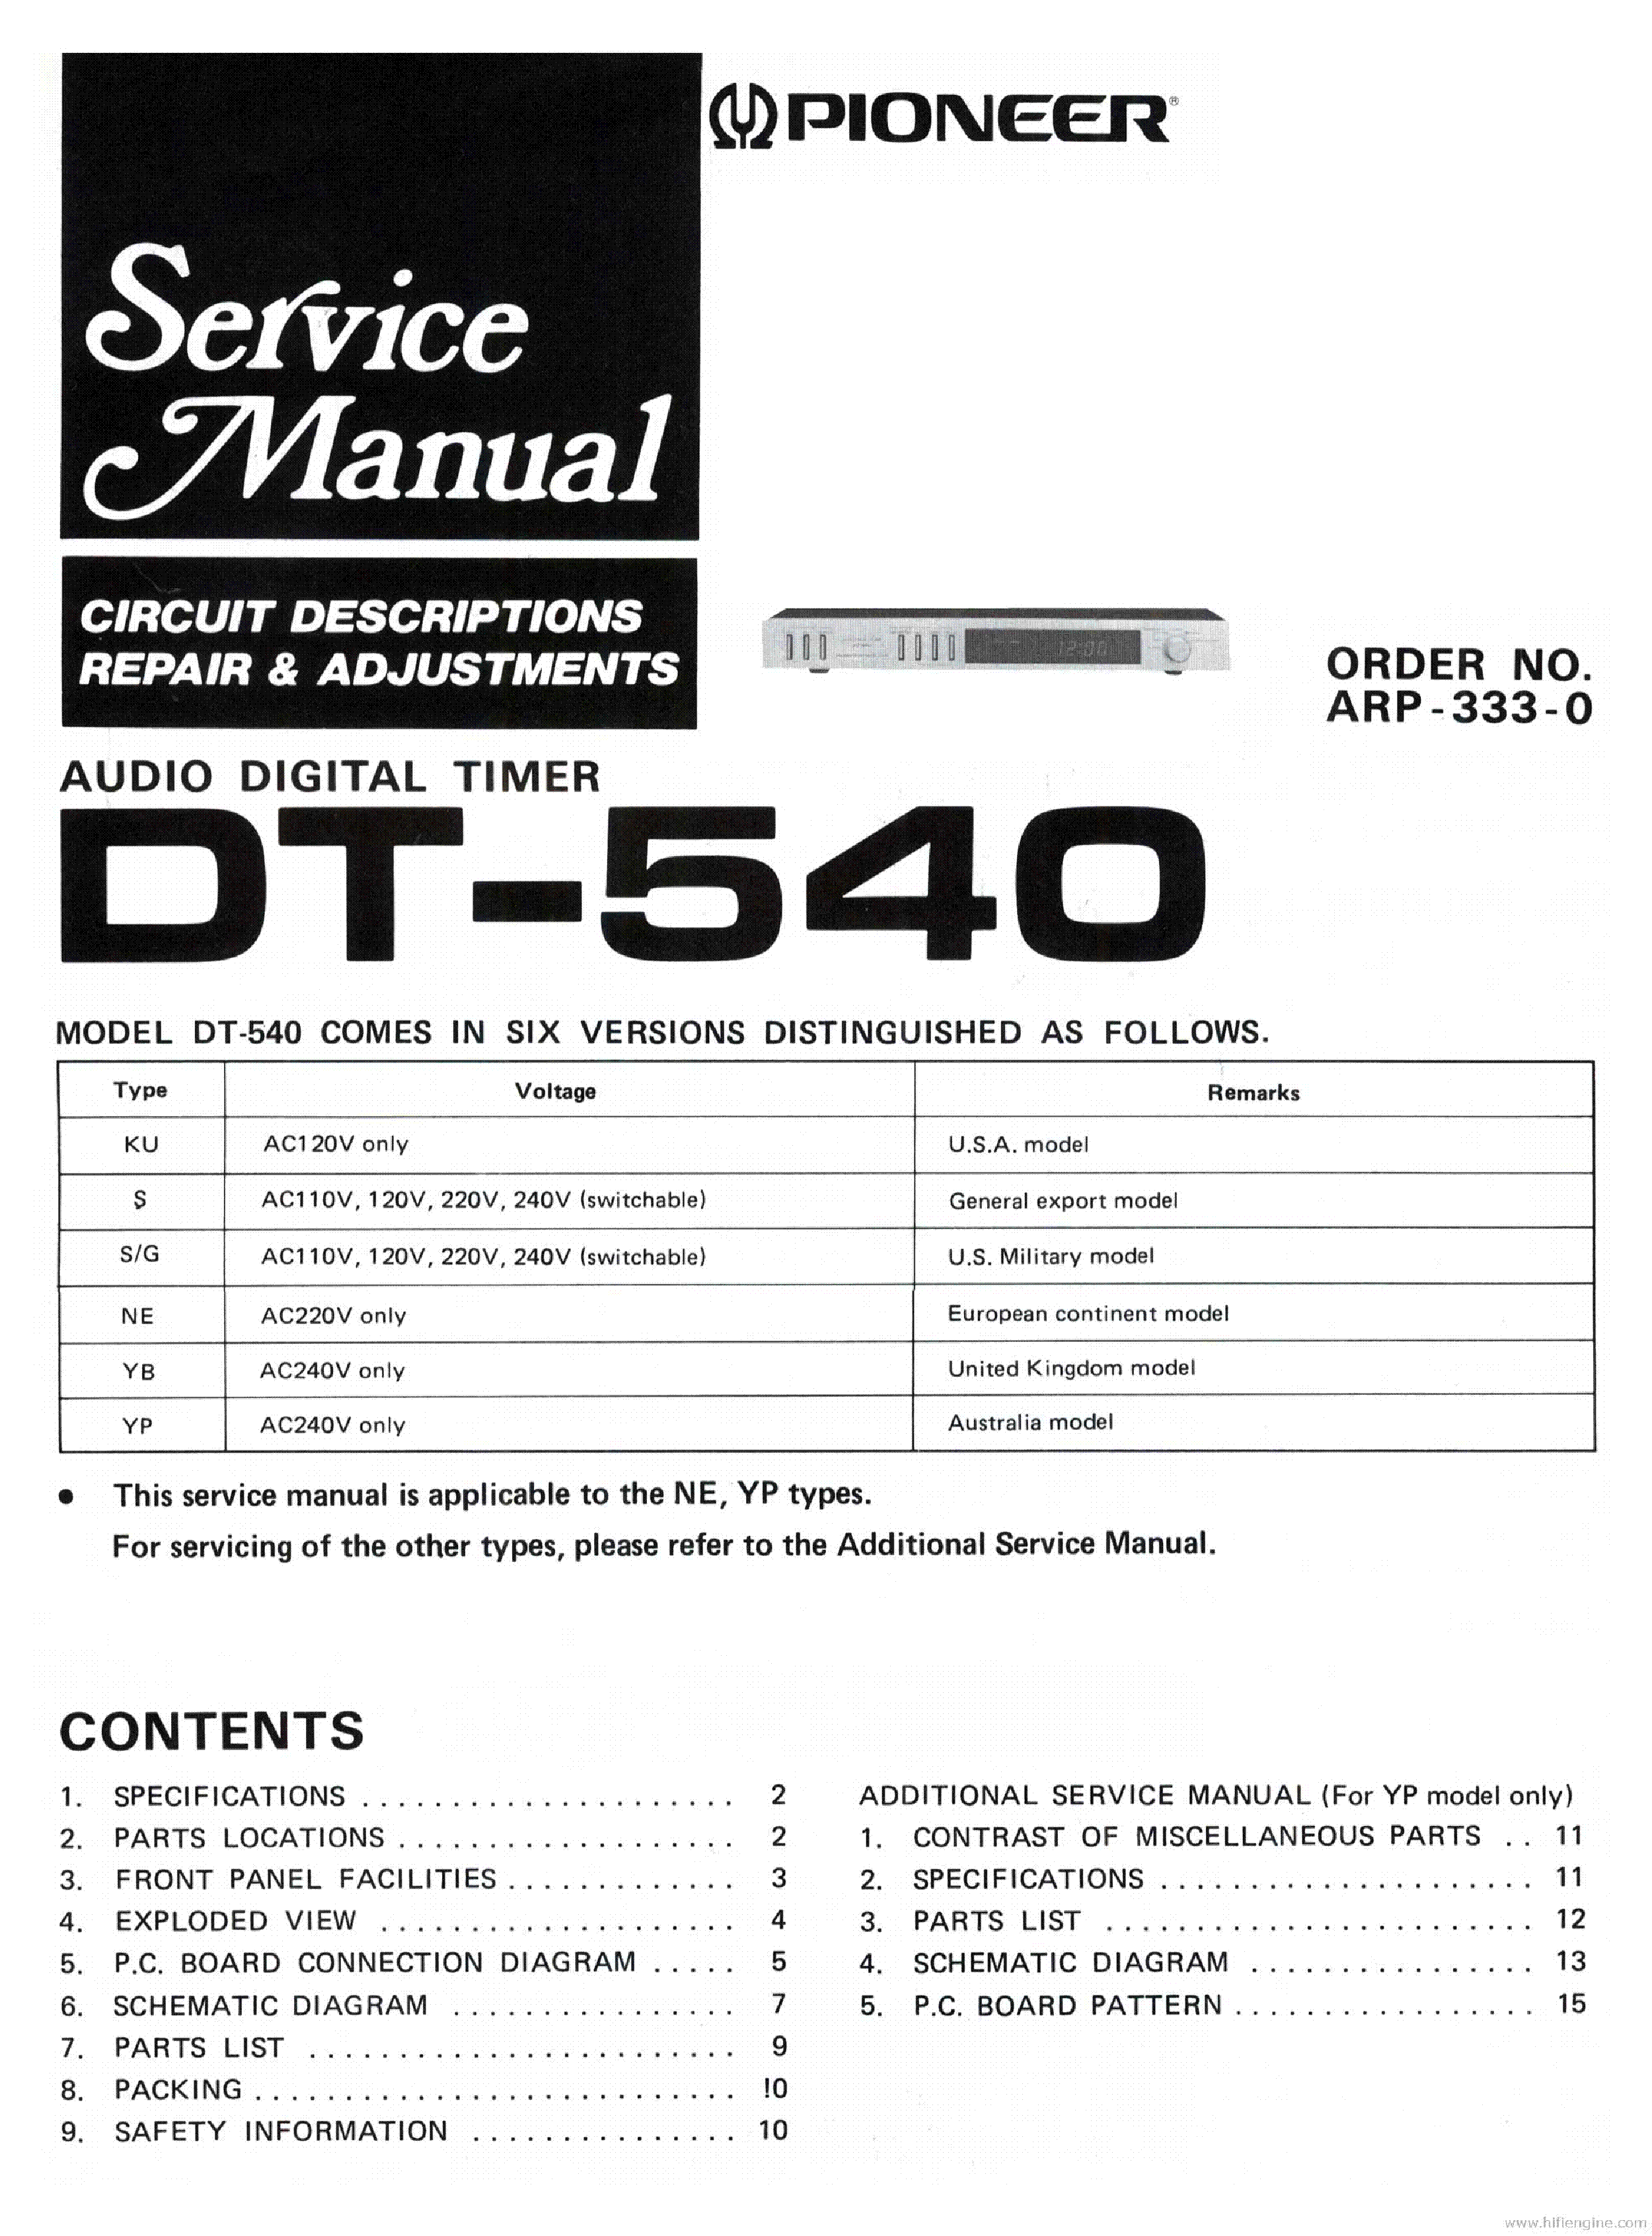 PIONEER DT-540 ARP3330 service manual (1st page)